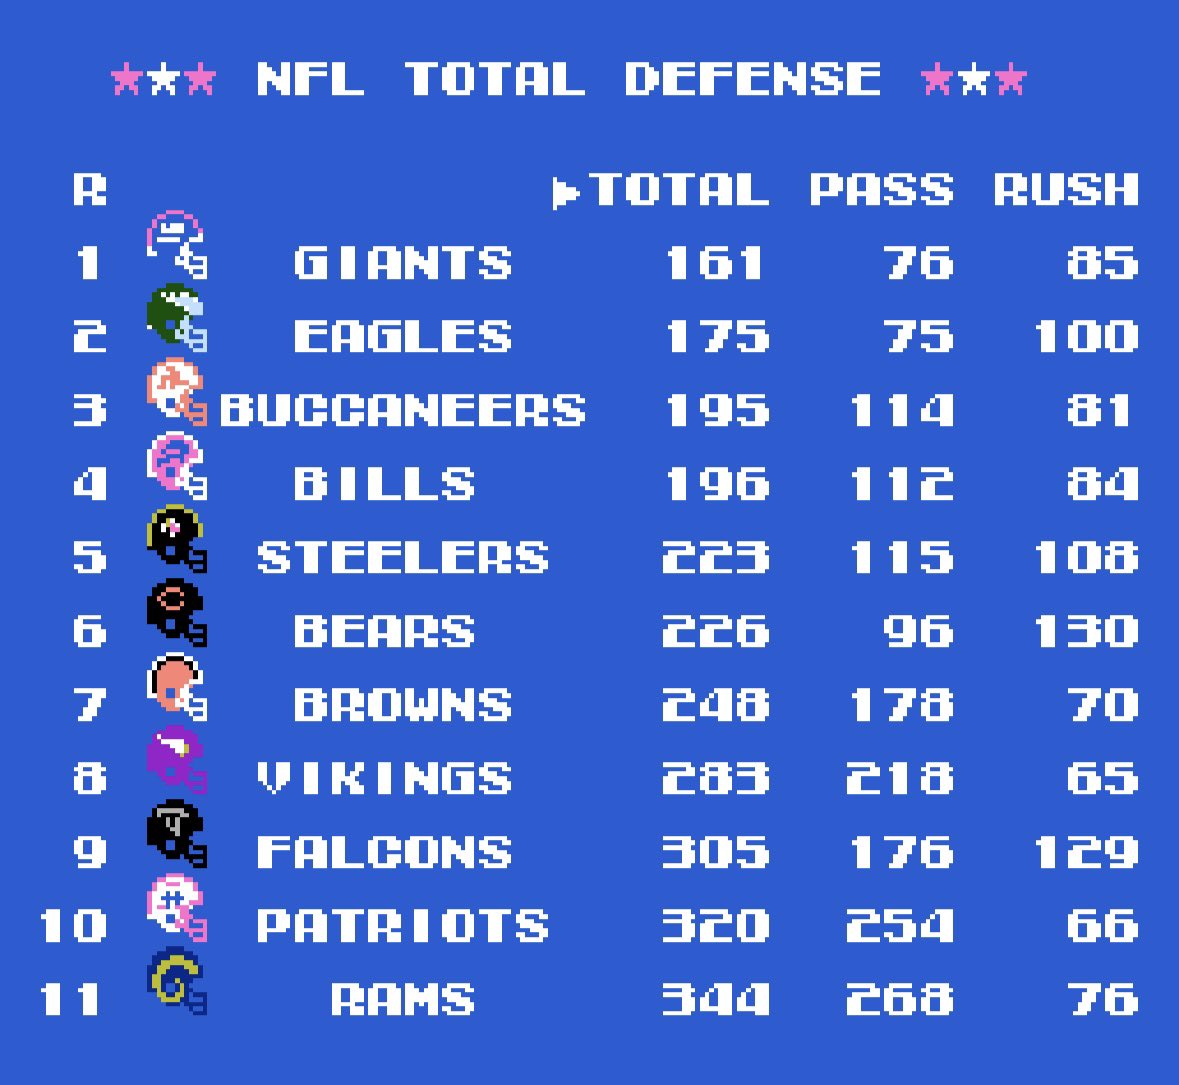 One of my favorite NES games, Tecmo Super Bowl. The regular season mode is outstanding, featuring a shit ton of stats. I play as the NY Giants, getting over 100 sacks using Lawrence Taylor on defense. 😂